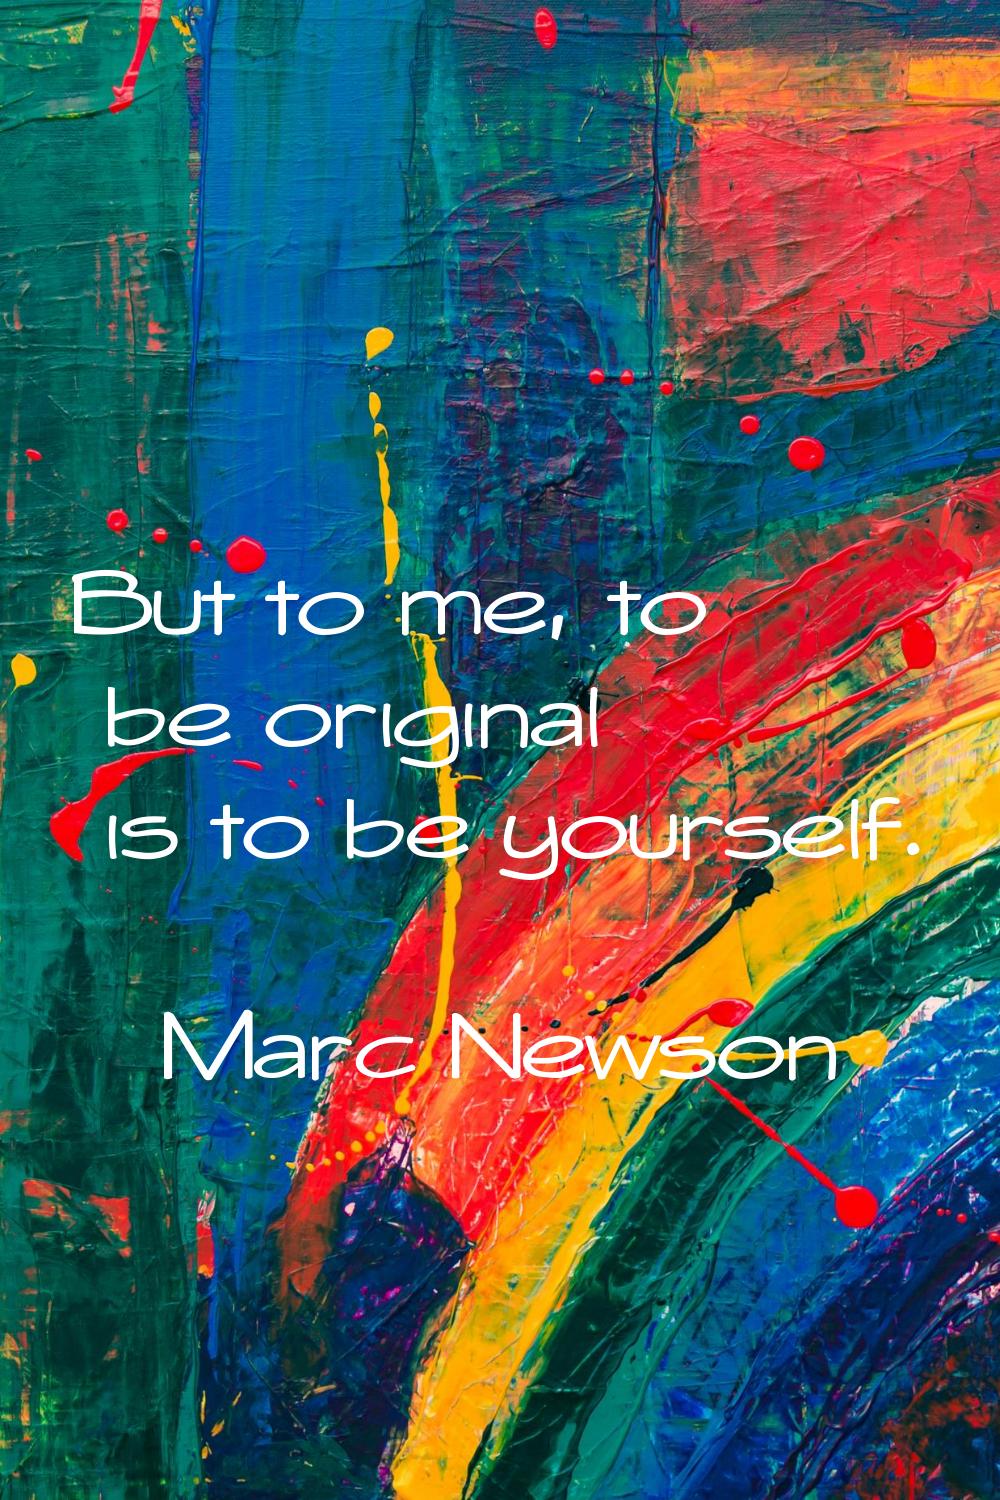 But to me, to be original is to be yourself.